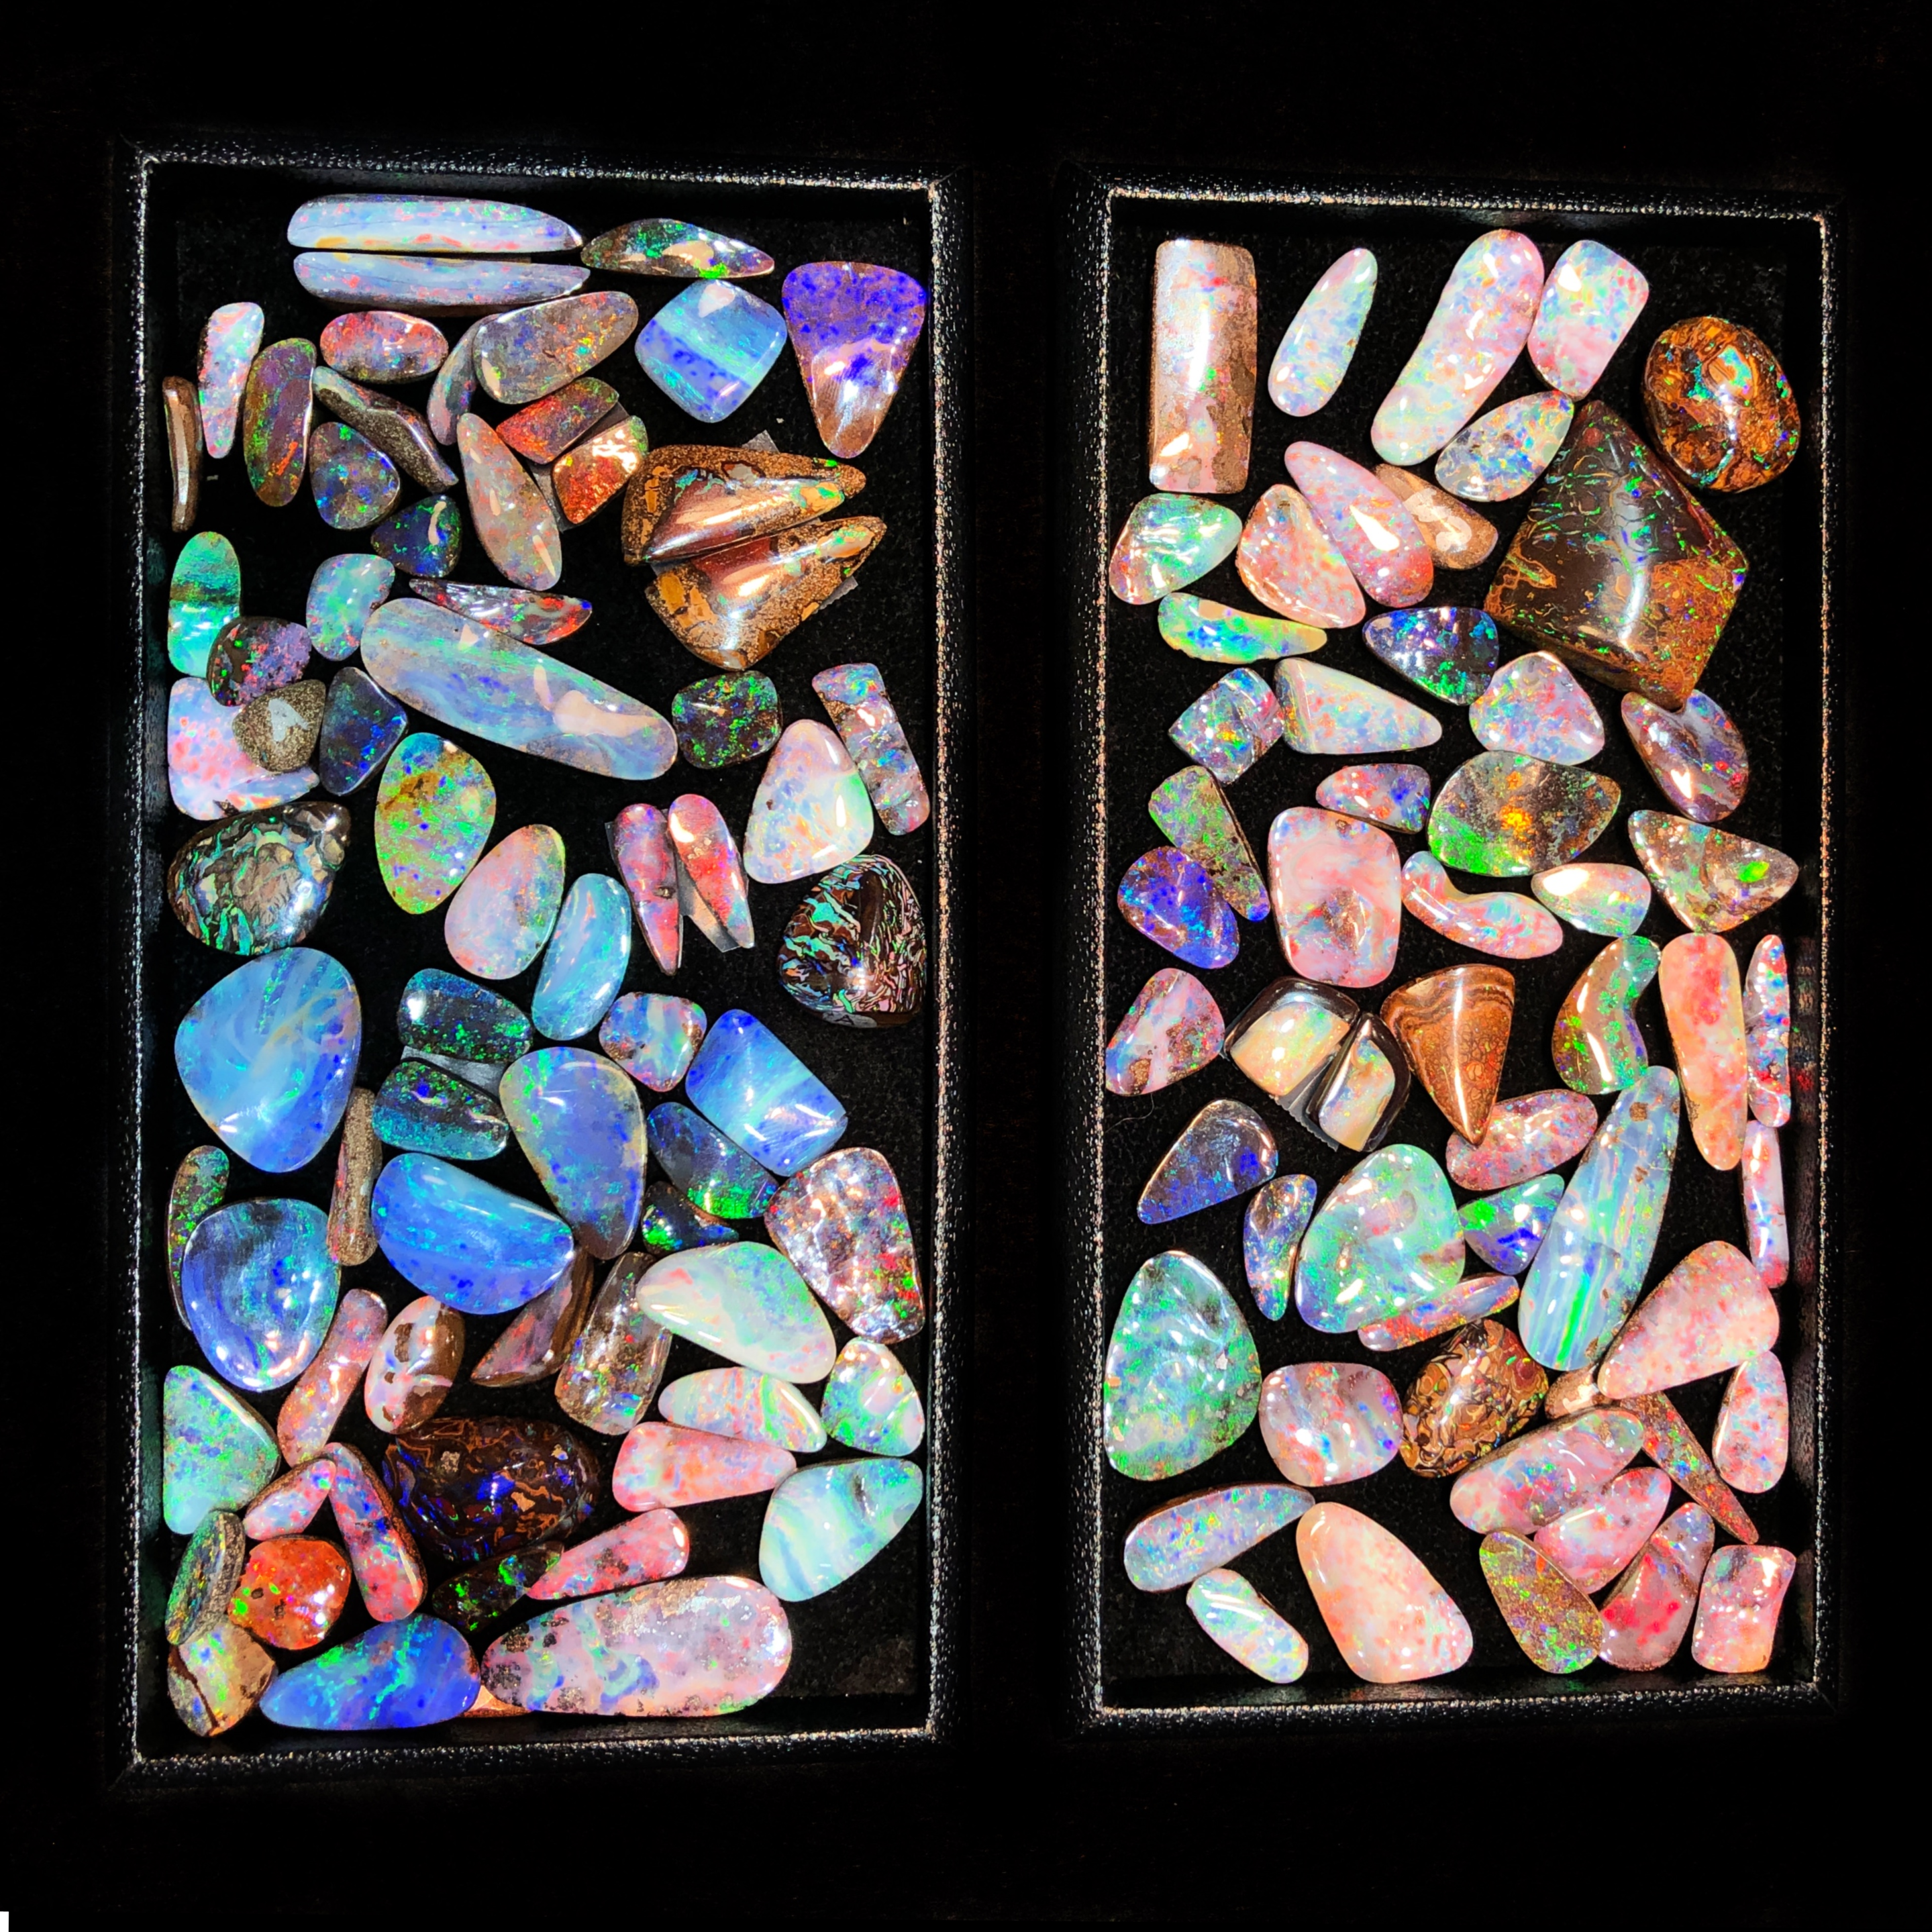 Beautiful opals from Parle Gems! Spotted at the AGTA GemFair 2019.